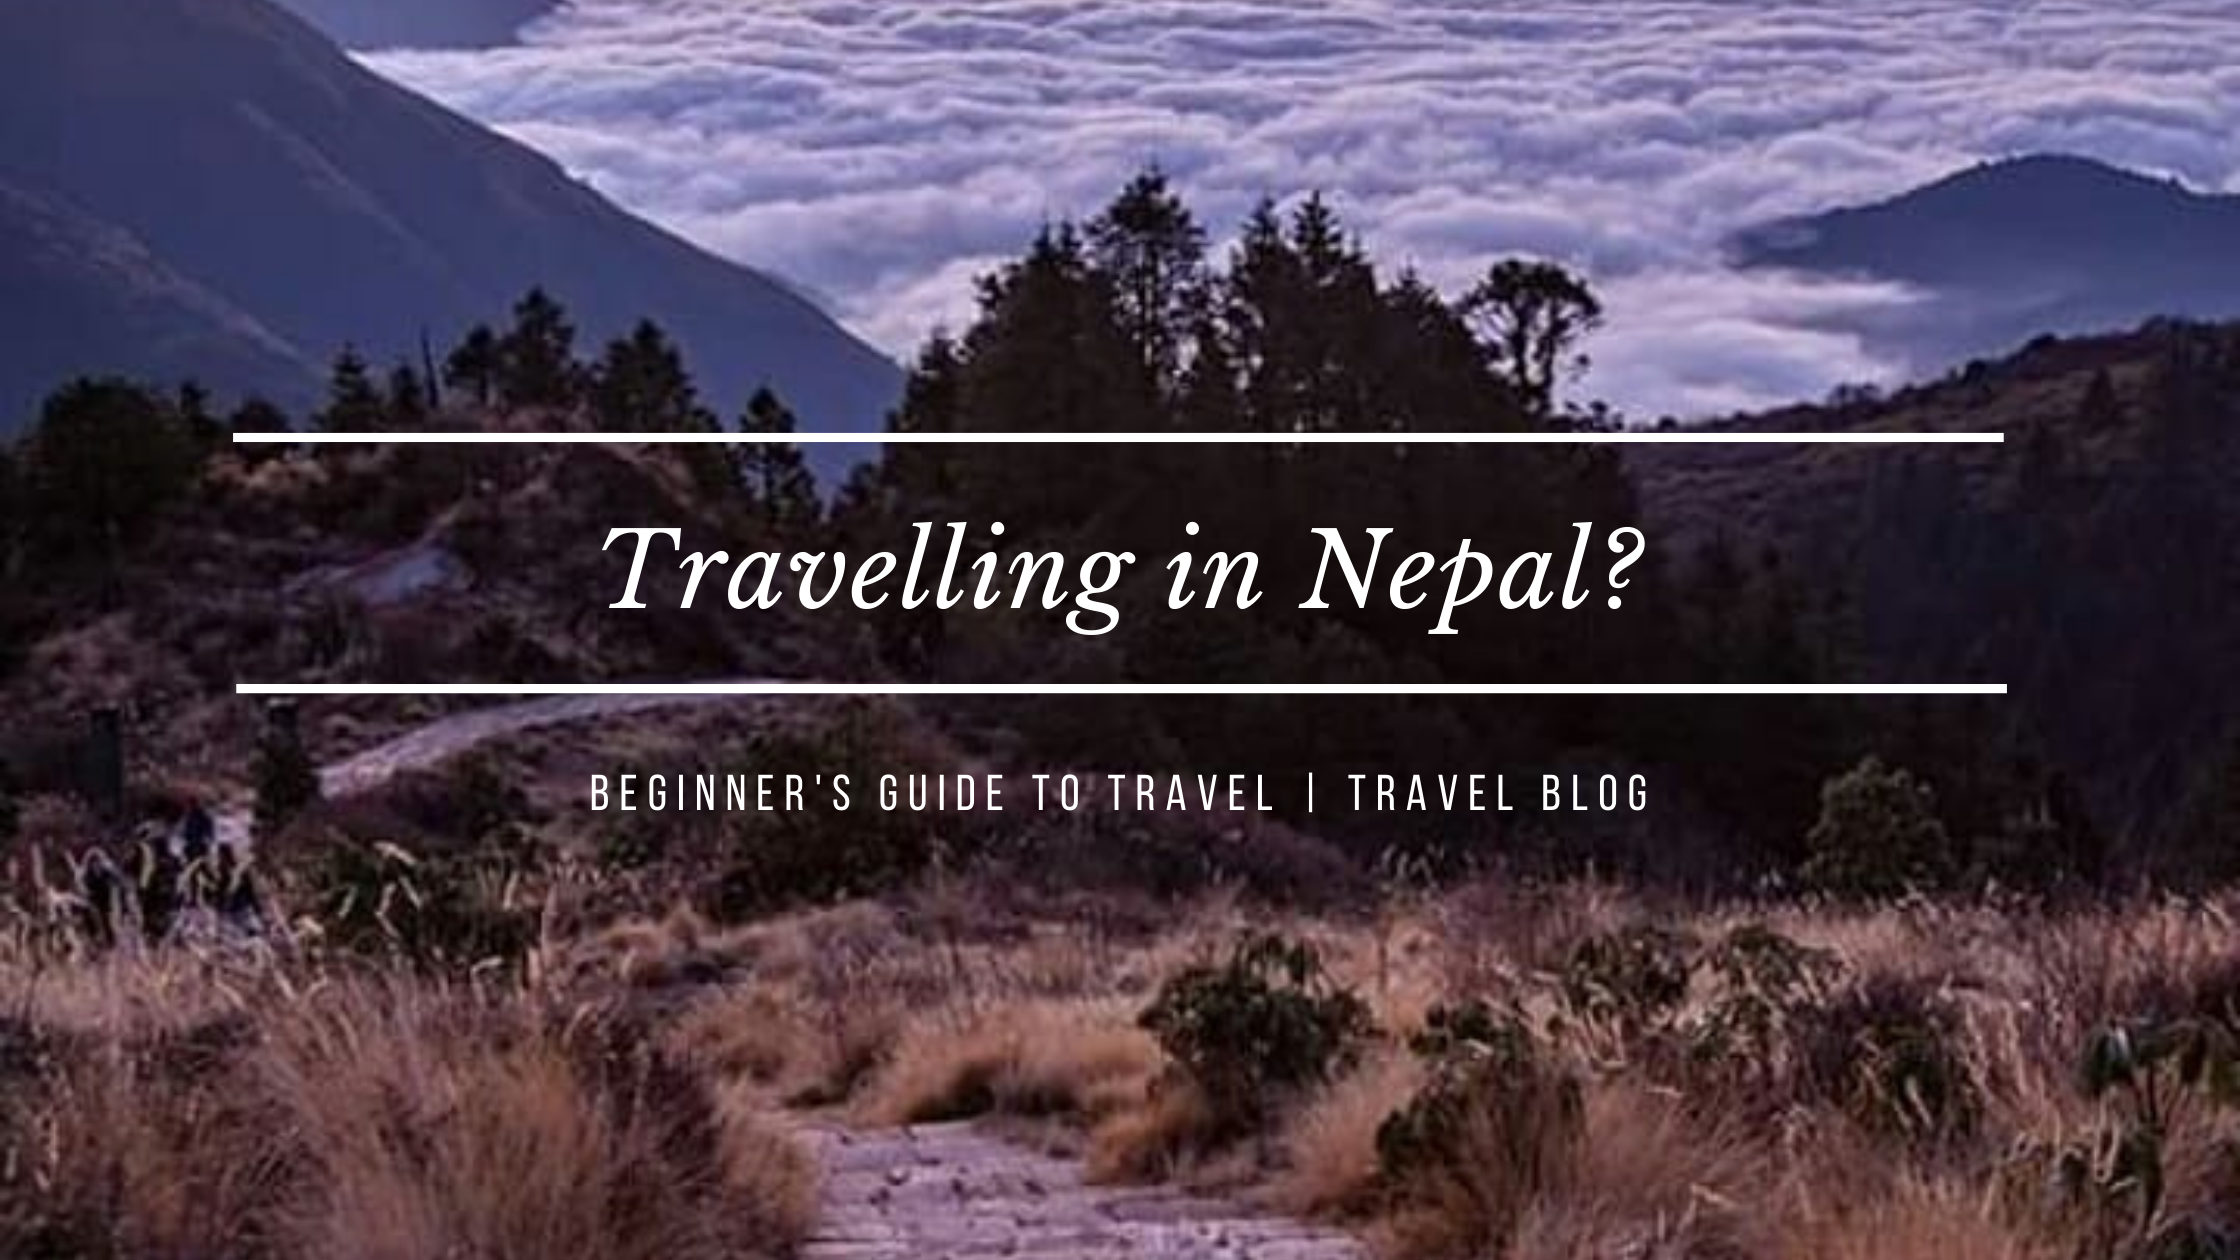 Beginners Guide to Travel!